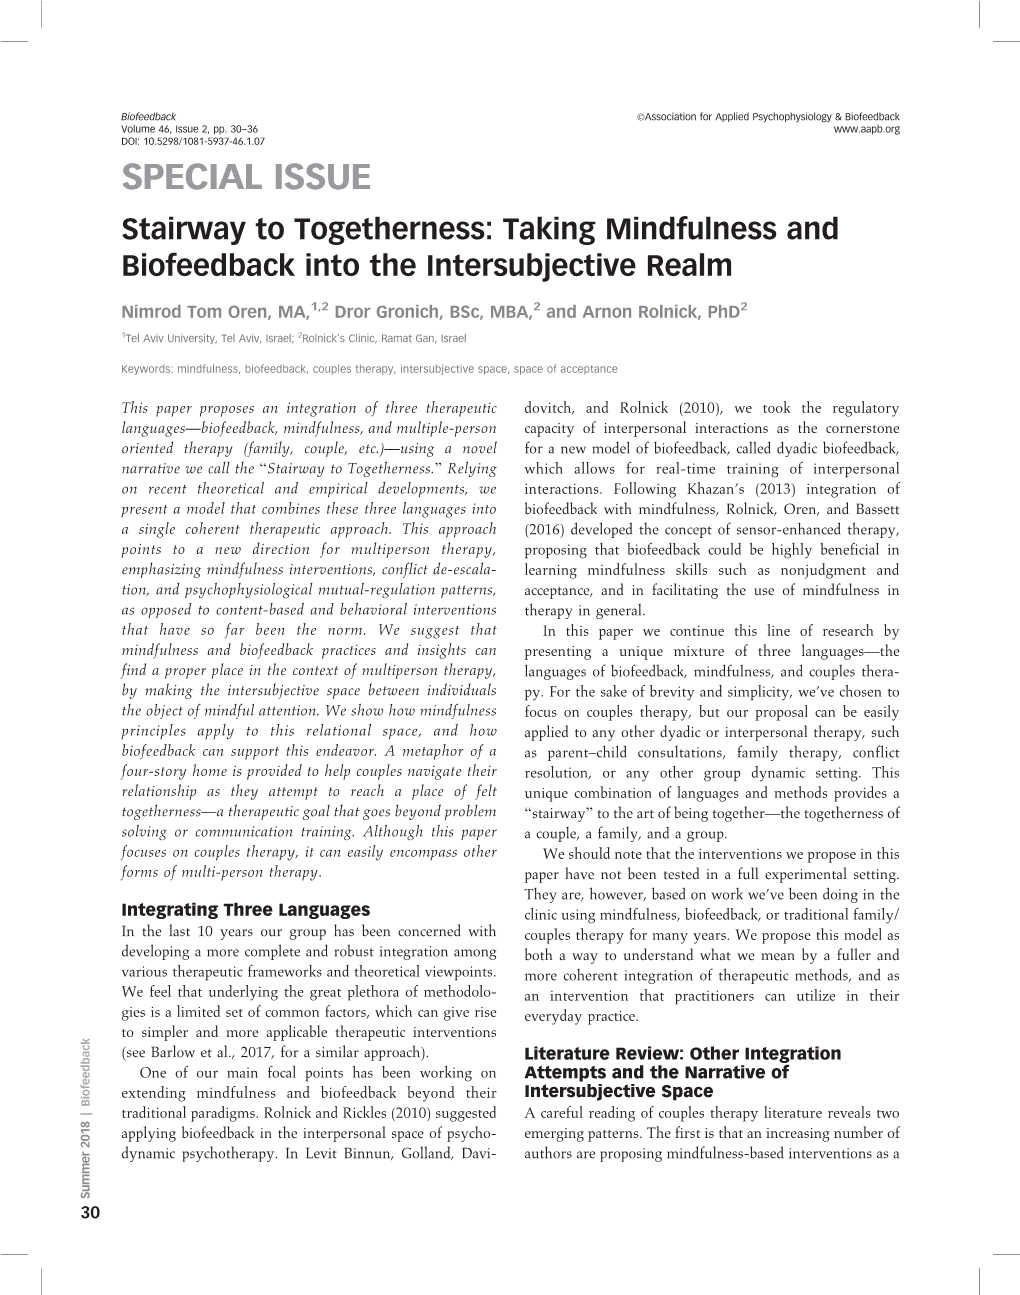 SPECIAL ISSUE Stairway to Togetherness: Taking Mindfulness and Biofeedback Into the Intersubjective Realm